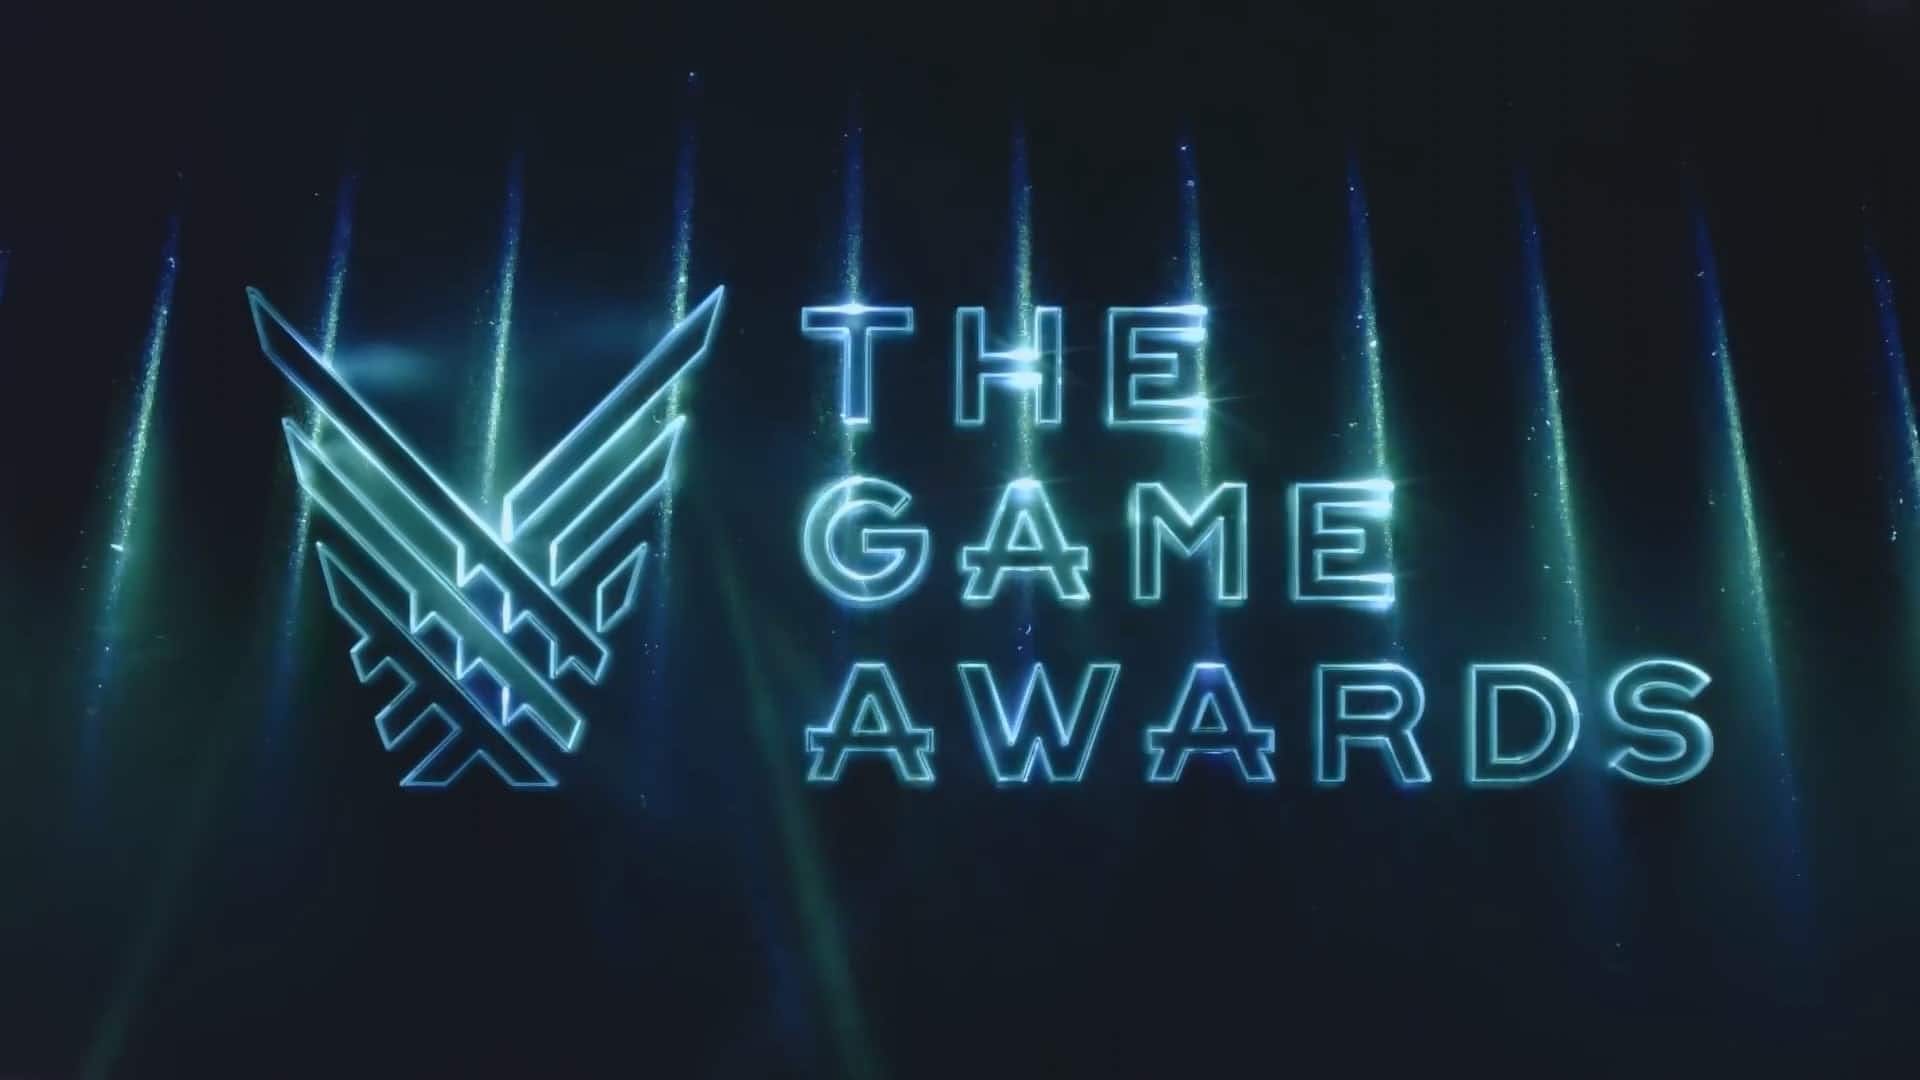 Sekiro has won Game Of The Year 2019 at The Game Awards